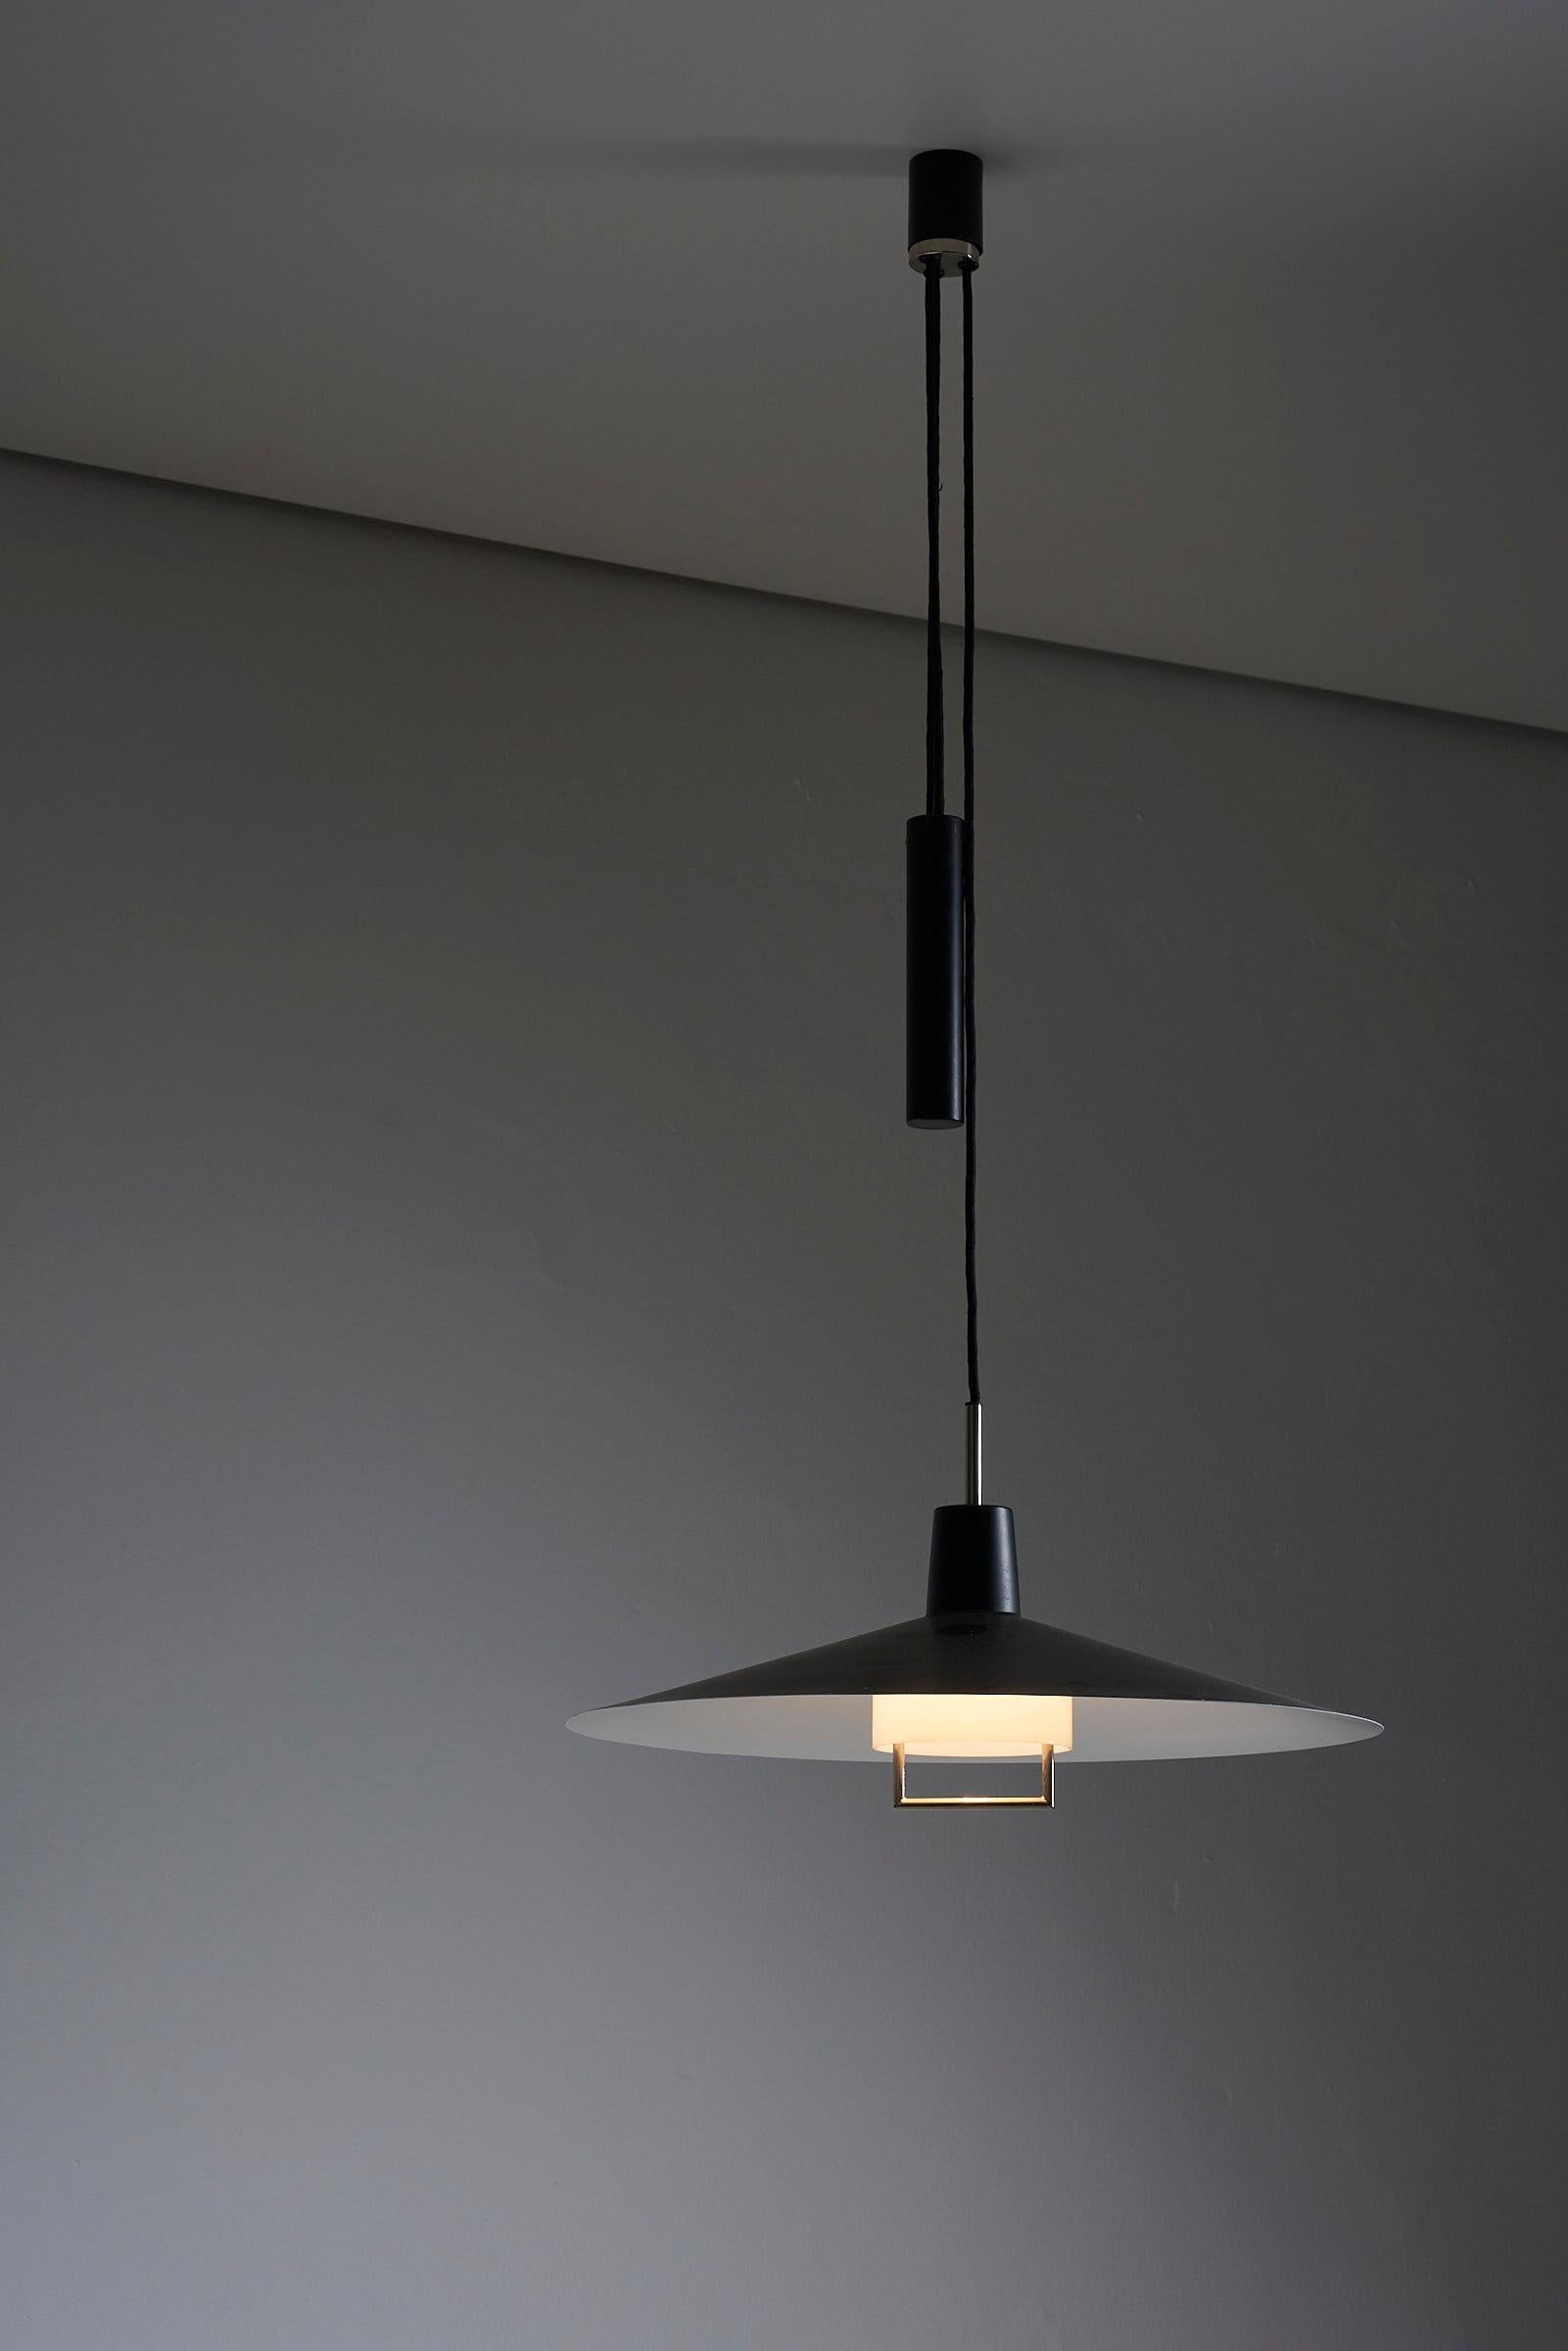 Introducing the Elegant Counterweight Pendant by Metalarte, Spain. This pendant lamp embodies elegance and functionality, making it a standout piece in any interior.

The lamp features a sleek black lacquered shade that exudes sophistication and